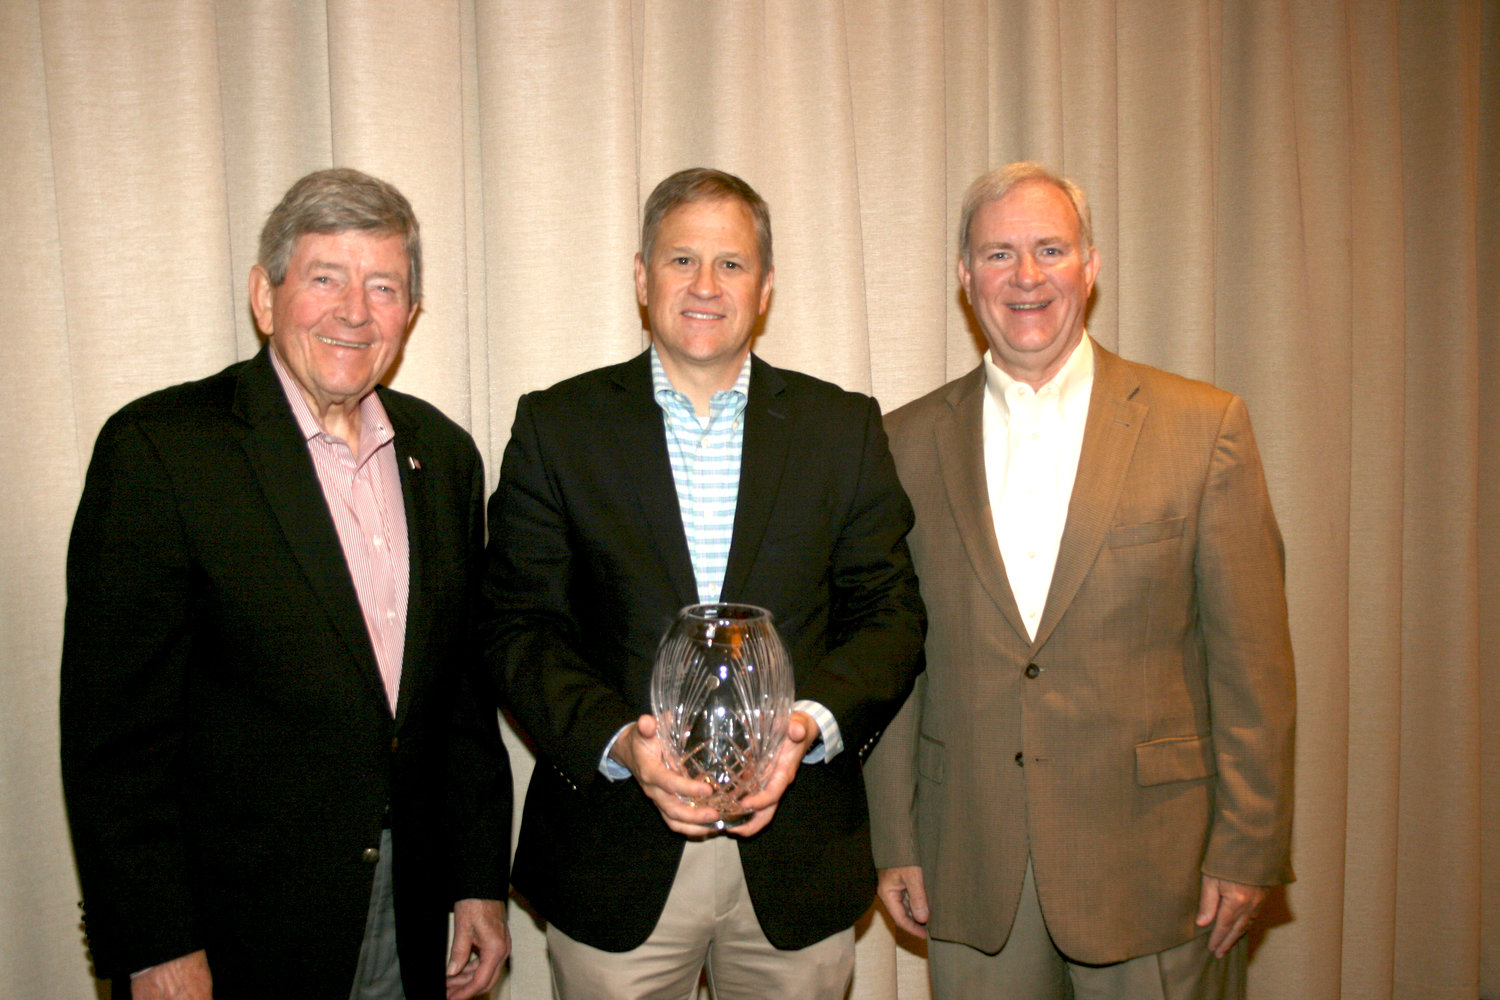 Tom DeBell, Riviera Utilities President/CEO and vice chairman of the AMEA Board of Directors, was presented a special award for Riviera Utilities’ 40-year partnership with AMEA. Shown with him are (L to R): Mayor Gary Fuller of Opelika, chairman of the AMEA Board of Directors, and Fred Clark, President & CEO of AMEA.